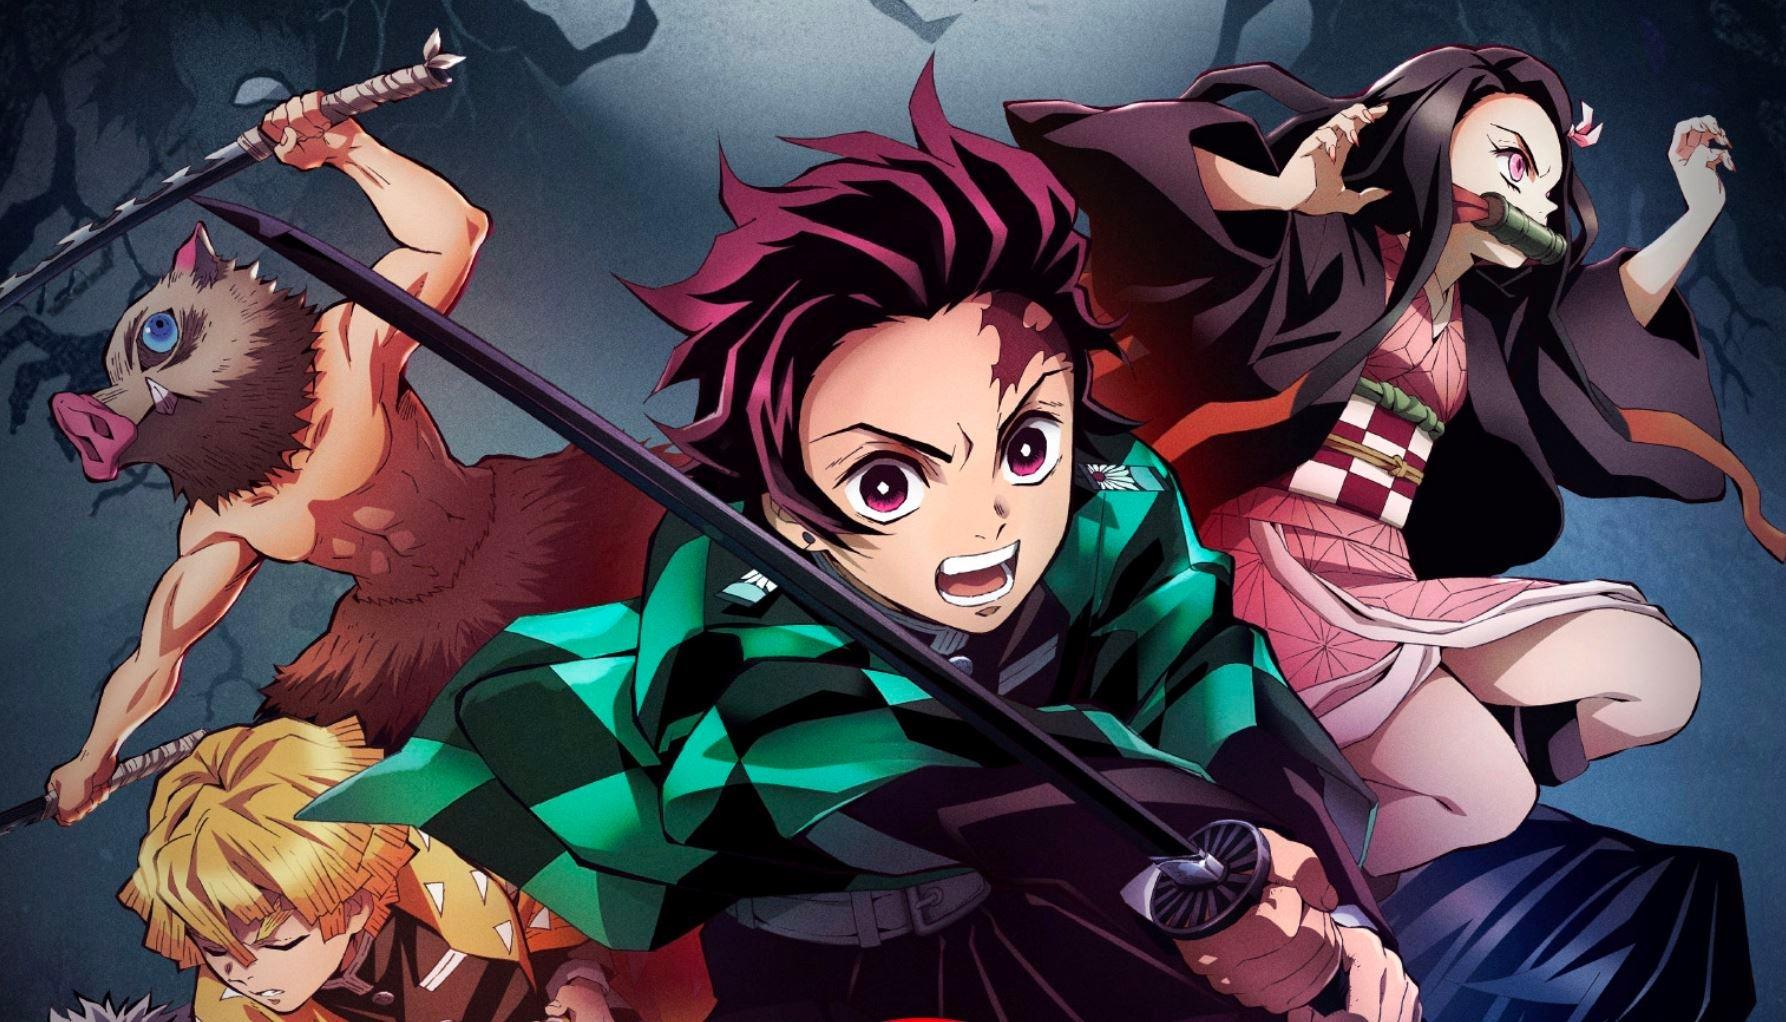 Demon Slayer Anime Review - All About Demon Slayer